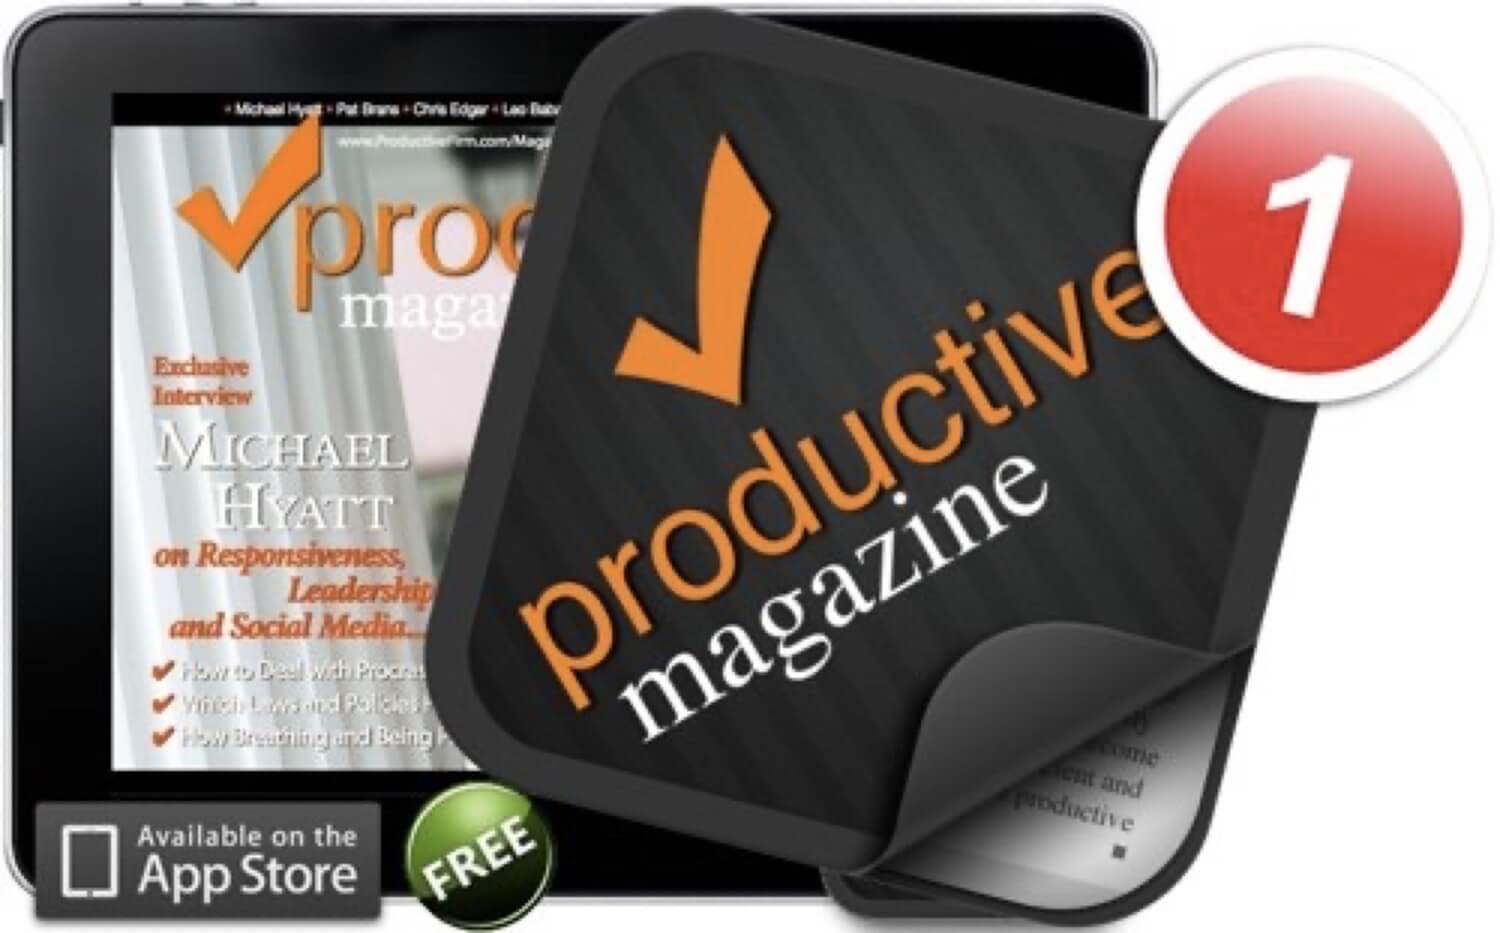 Why the Productive! Magazine iPad app is free